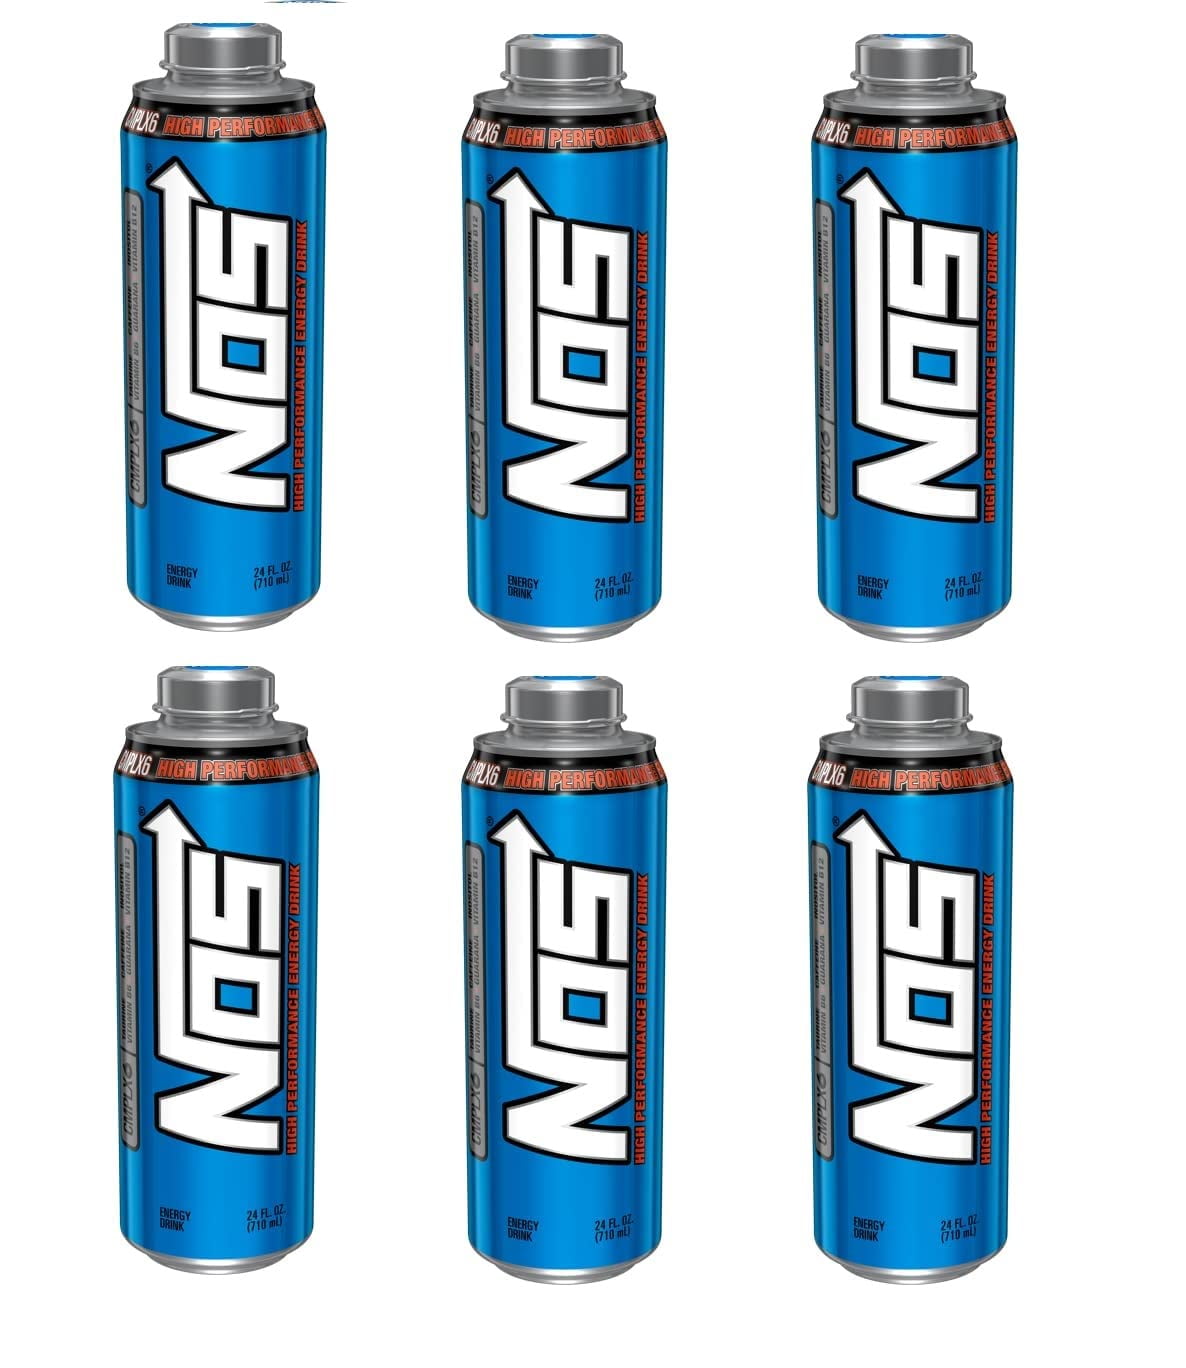 NOS High Performance Energy Drinks (24fl.oz Original) Twist Top Cans-Pack  of 6